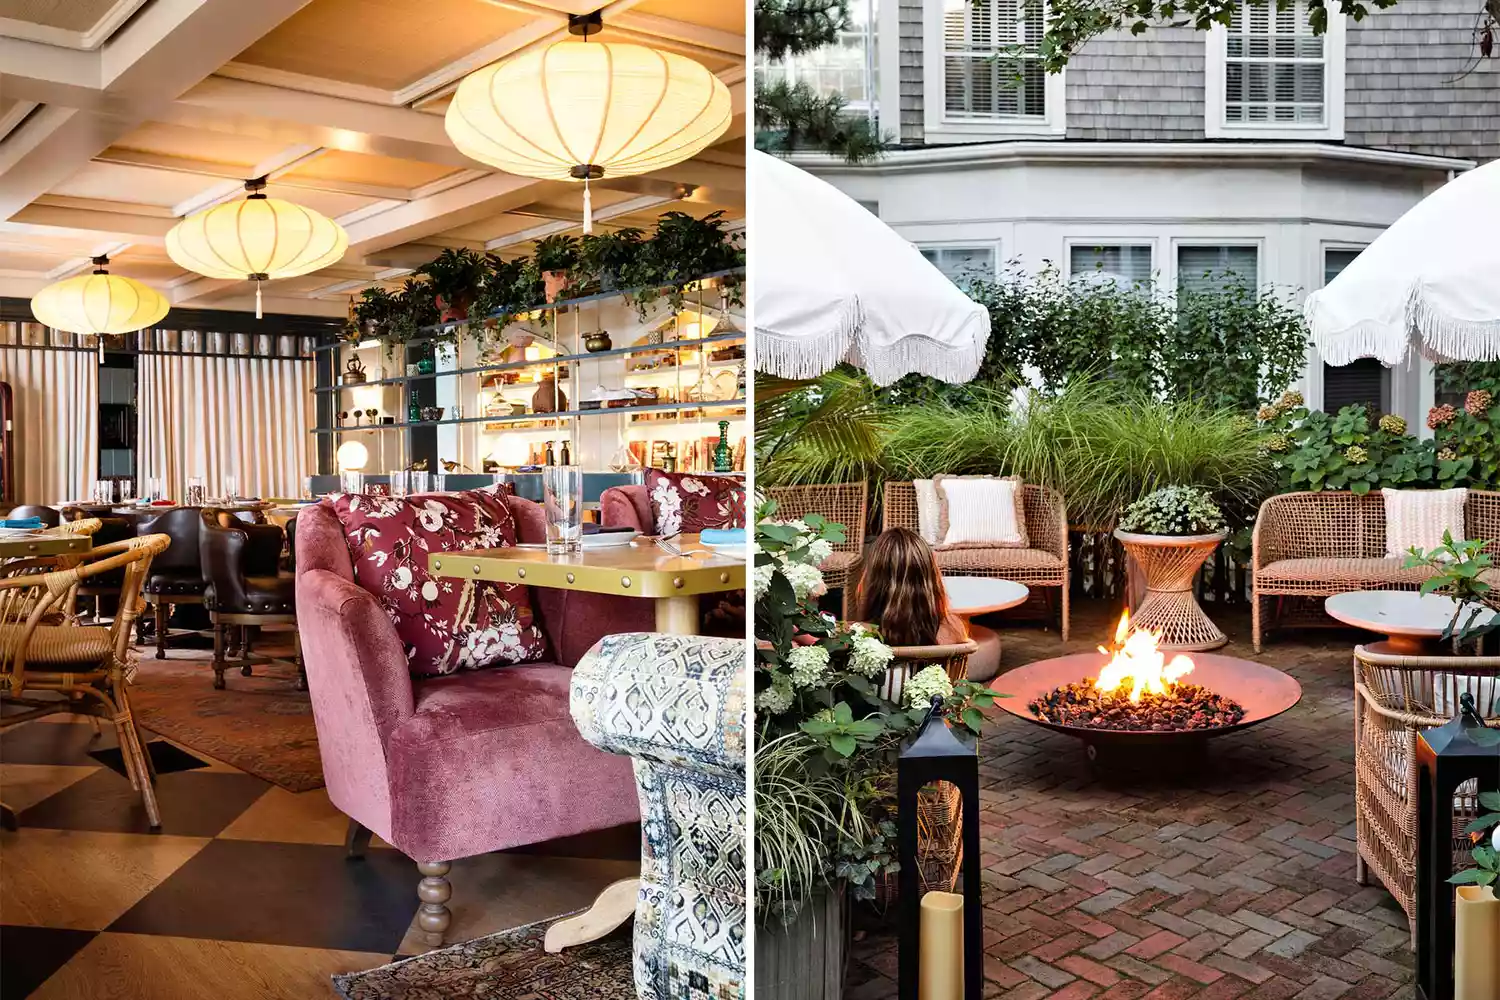 While Nantucket Still Retains Its Small-Town Charm, These Modern Hotels Have Made It a Global Destination.